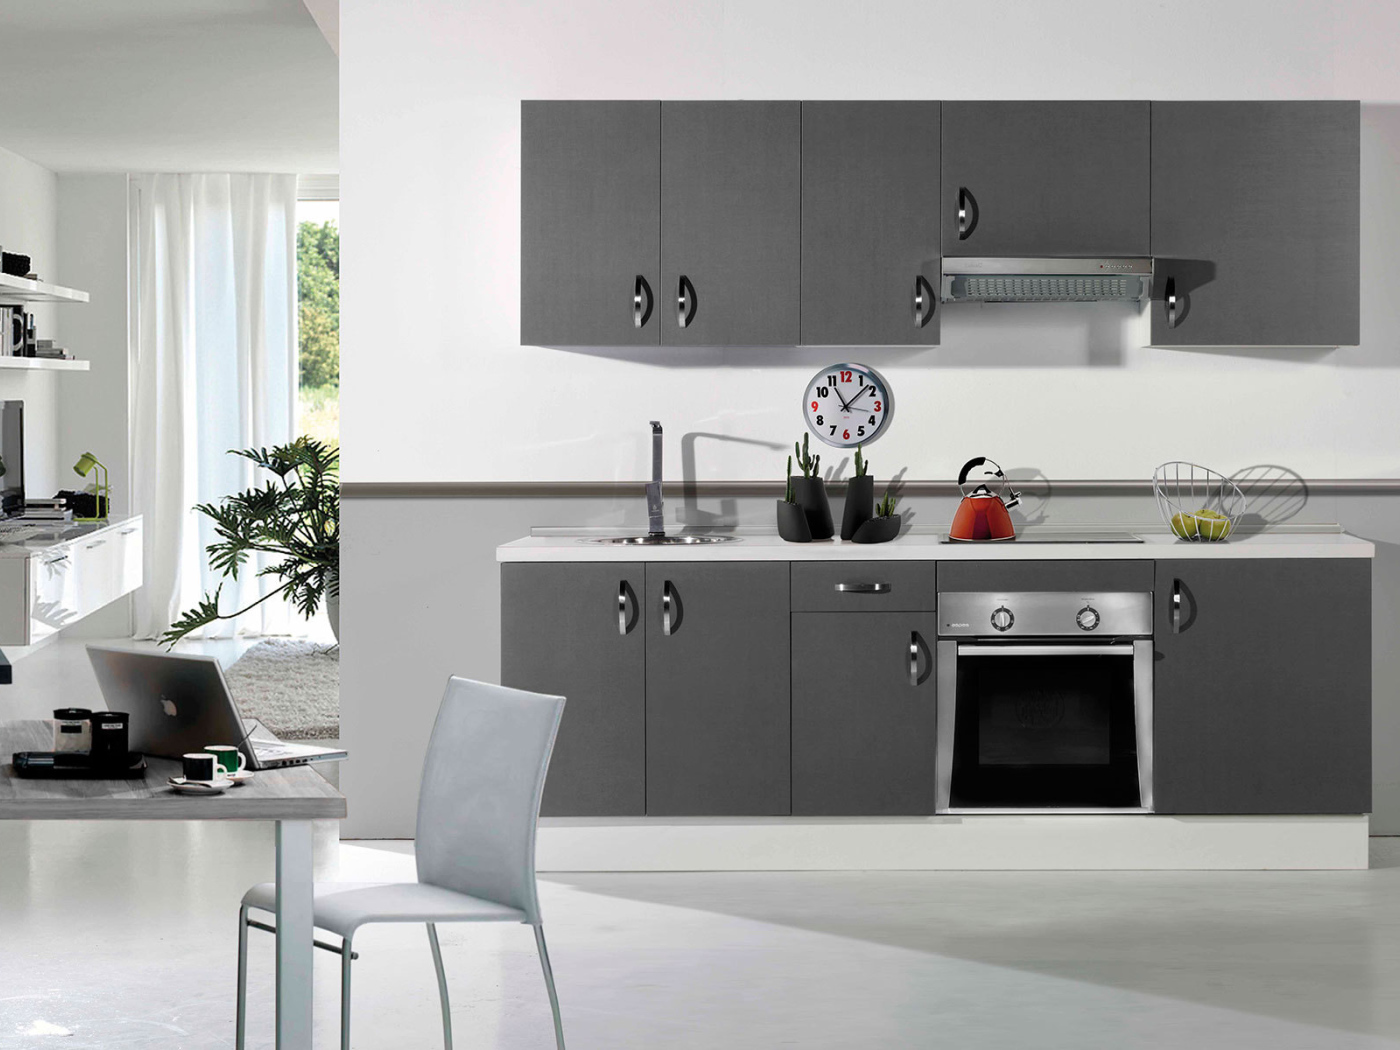 Gray color in the kitchen